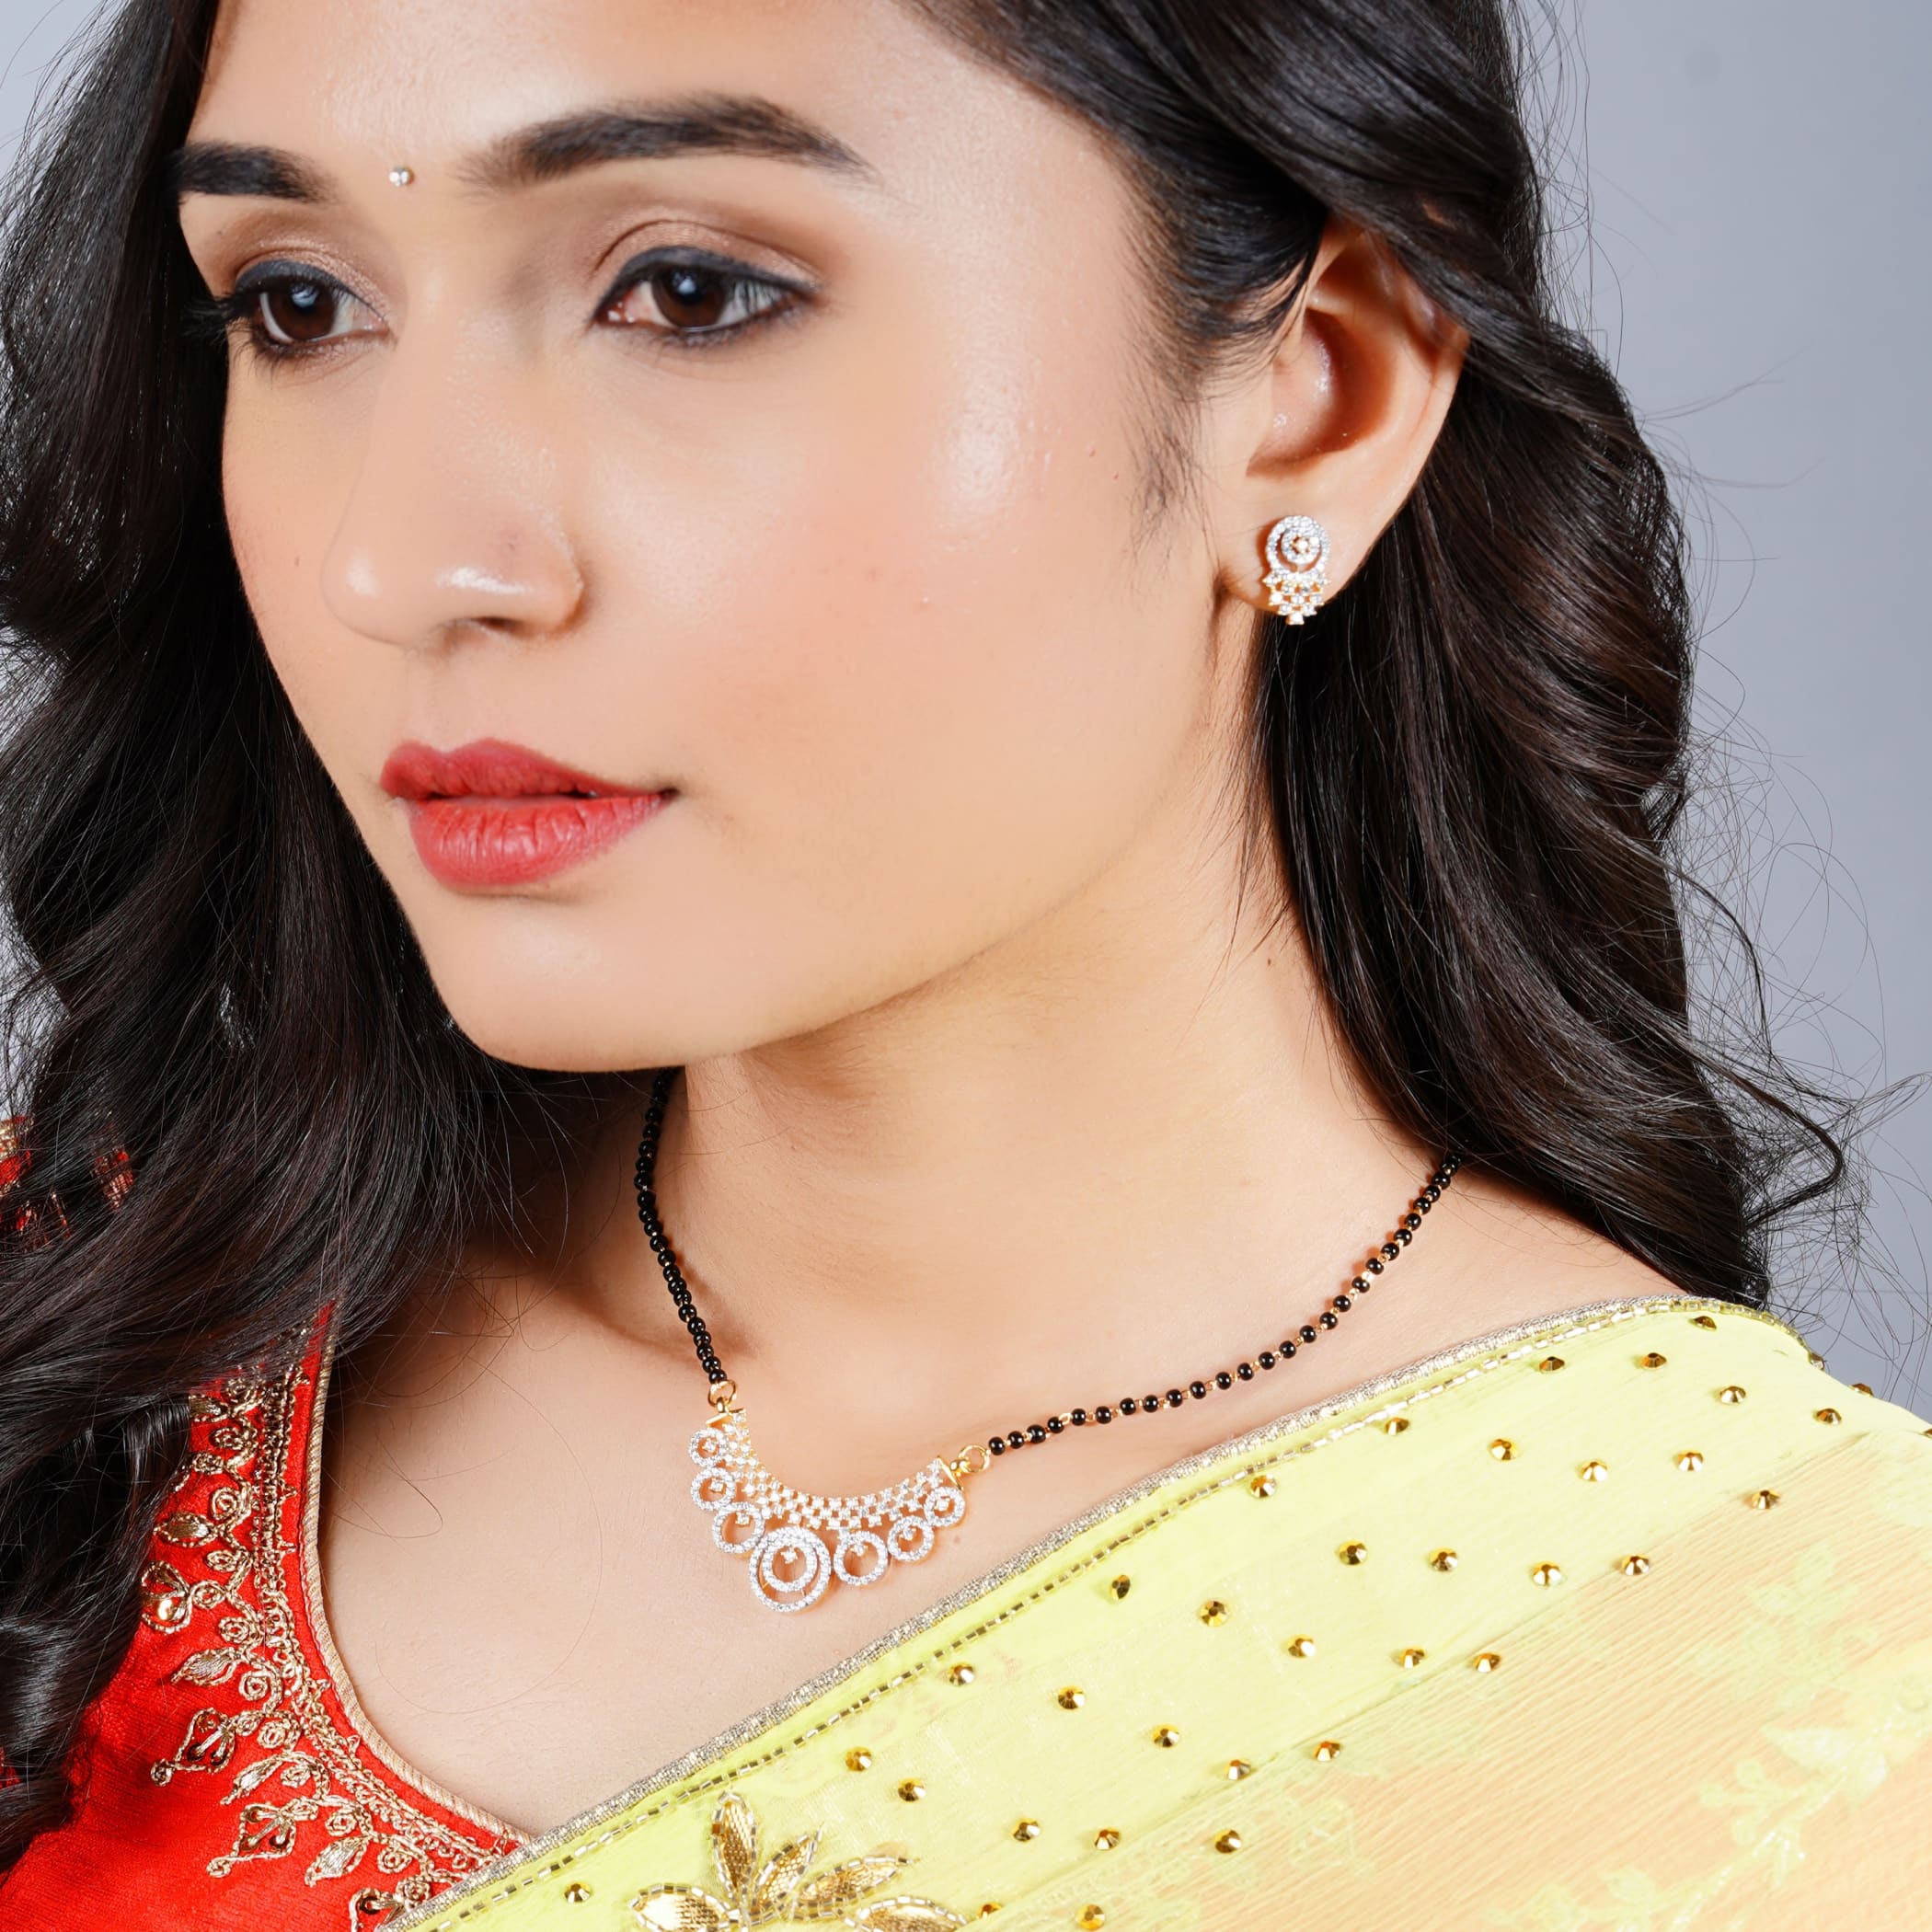 White Stone Mangalsutra With Earring Necklace Chain